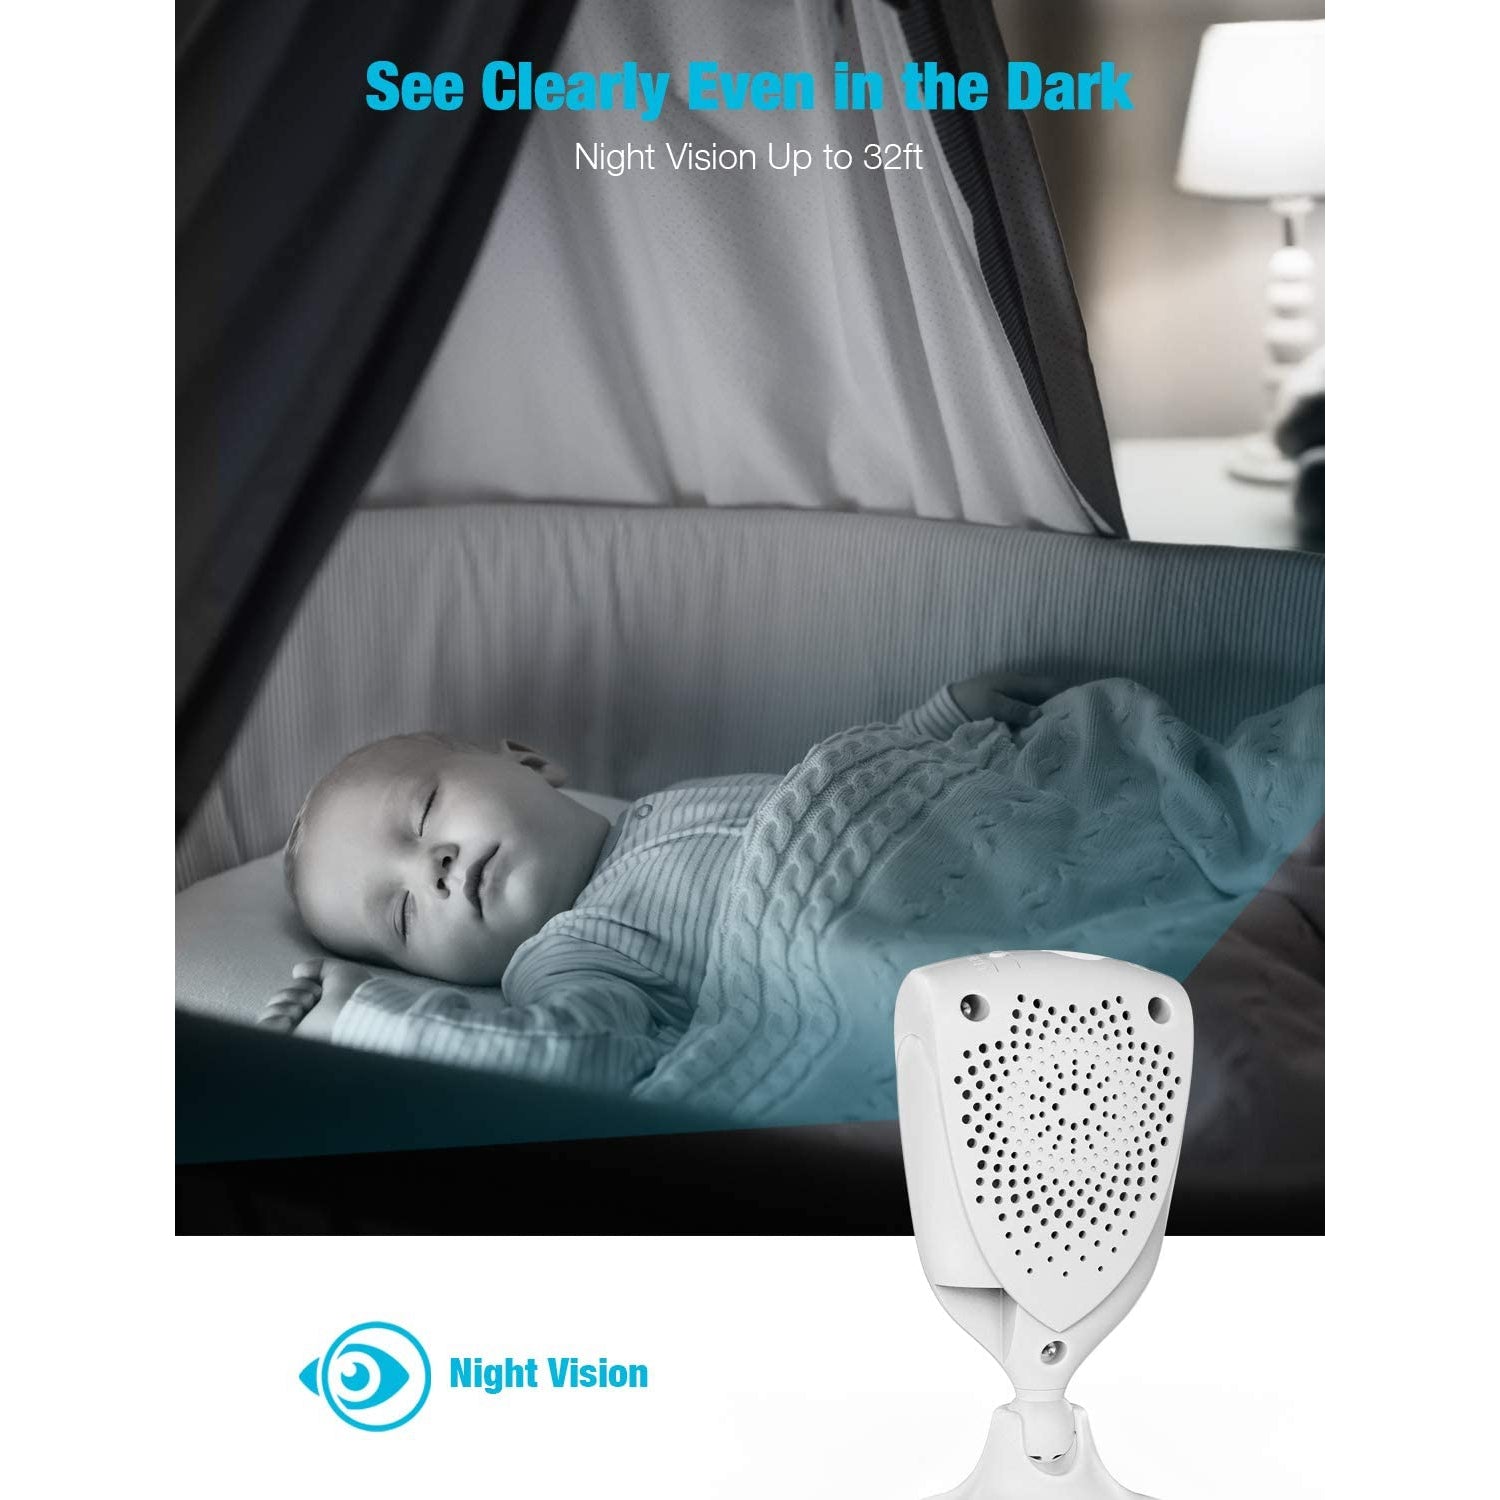 Editcam 1080P Mini Baby Monitor with Camera and Audio, Night Vision, 2-Way Audio, Motion Alarm for Home